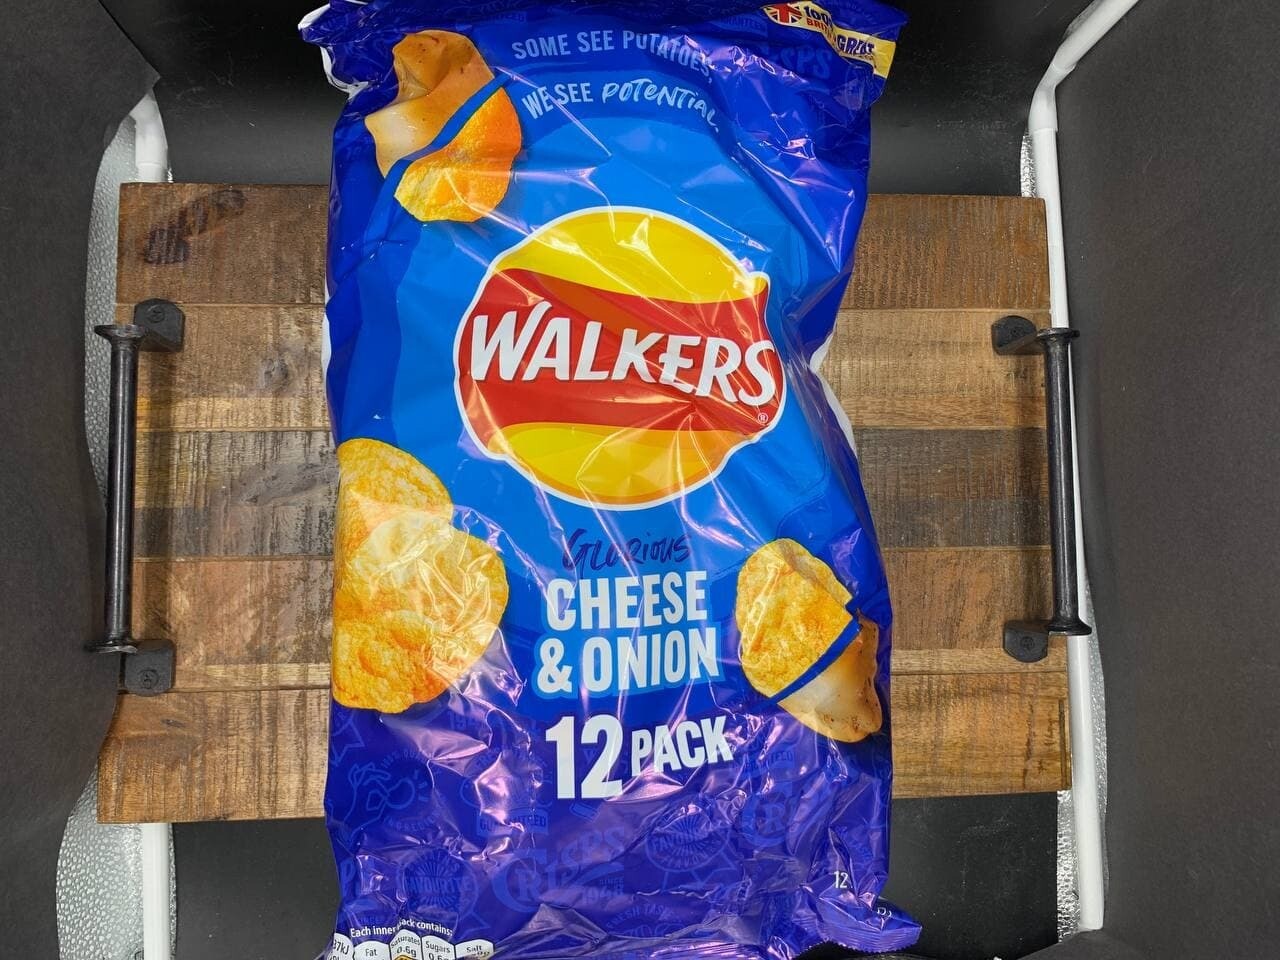 Walkers Cheese & Onion 12 Pack 12x25g